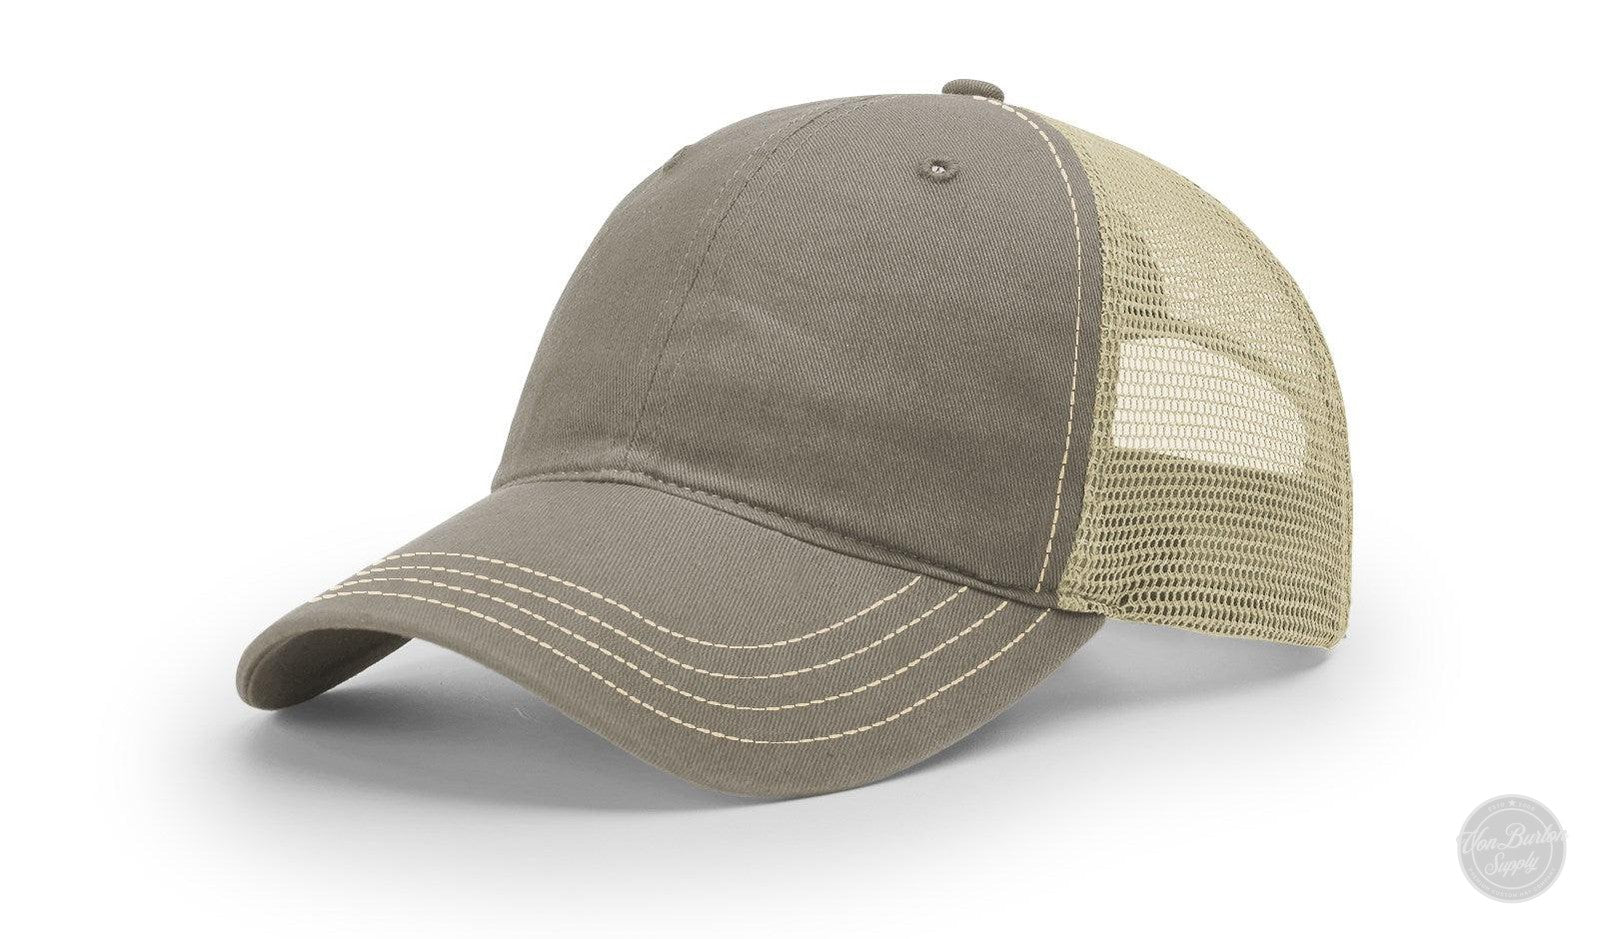 Leather Patch Hats - Custom Patch Hats